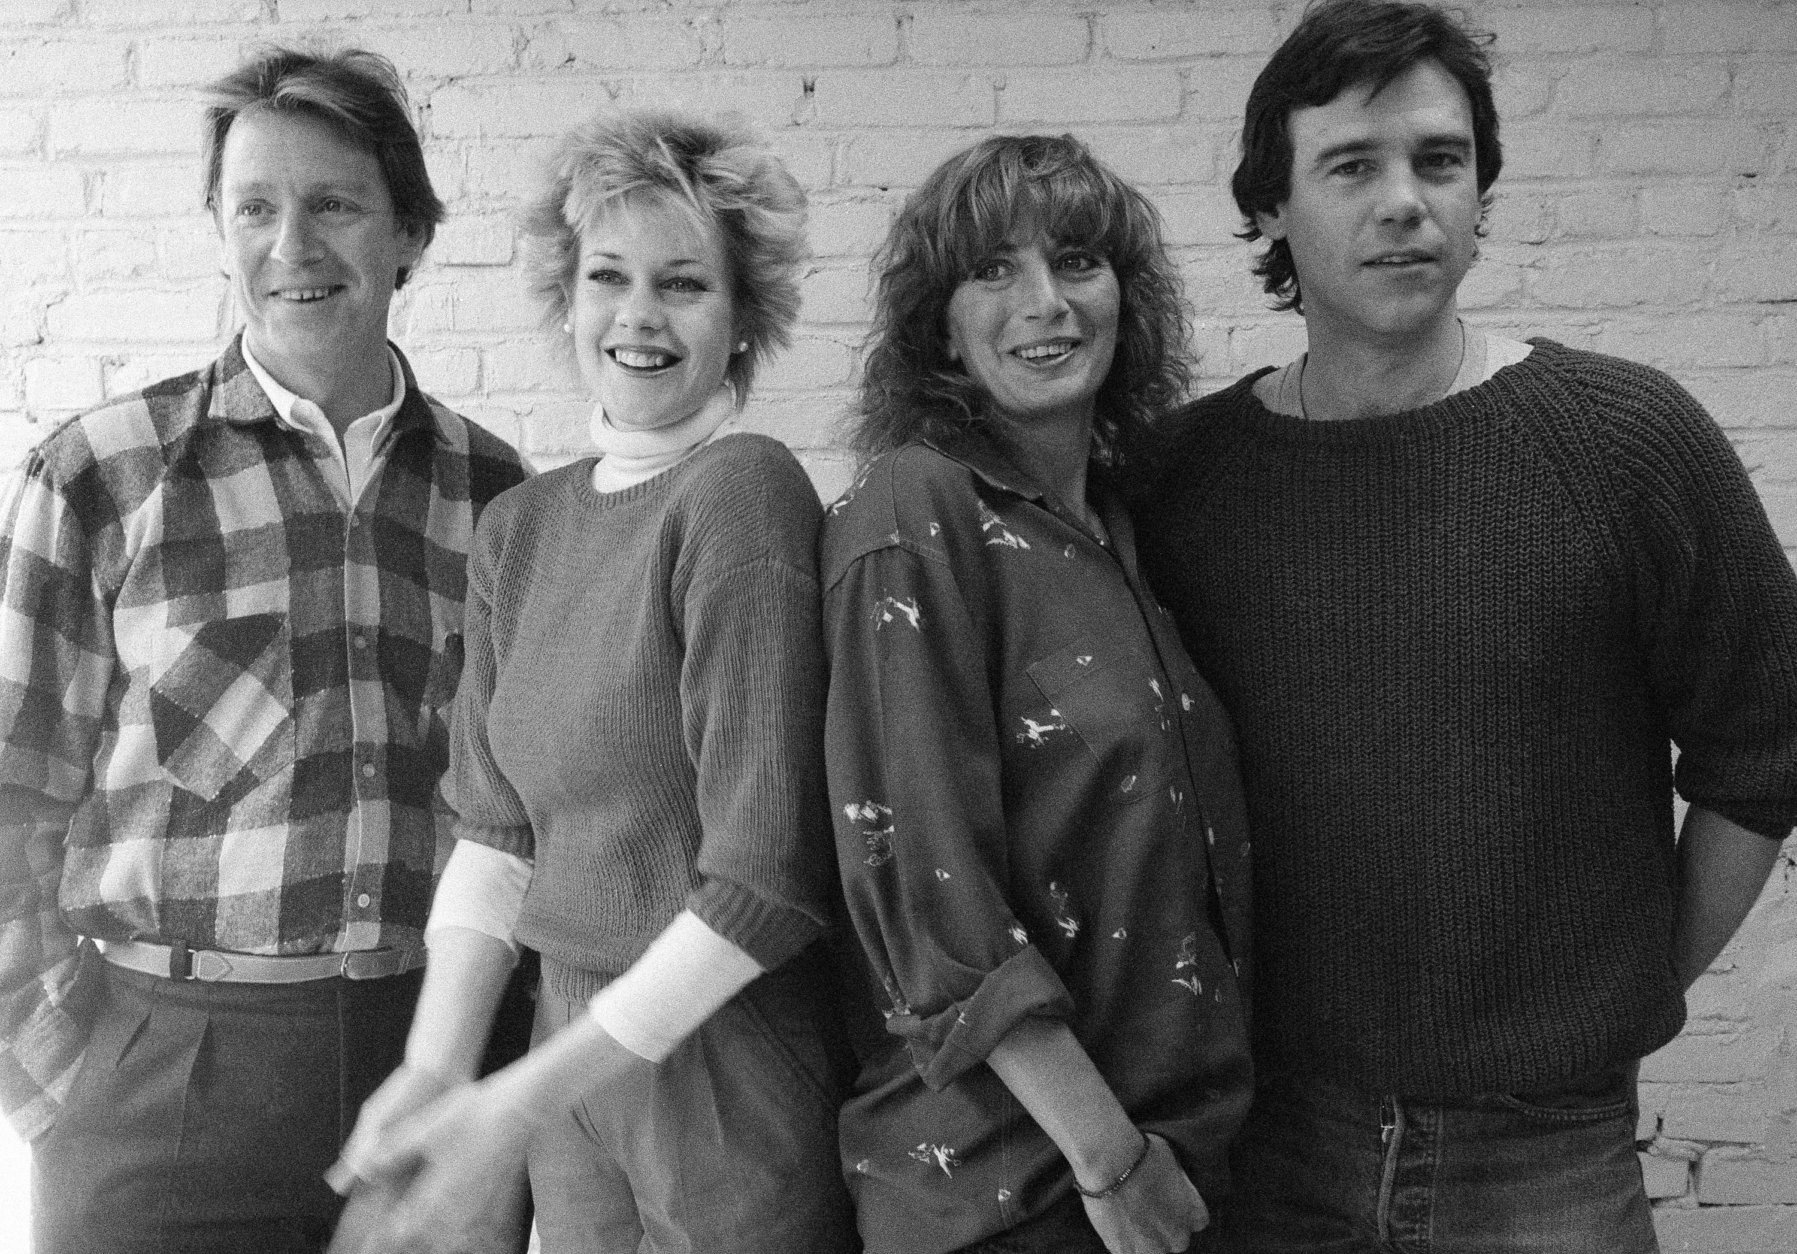 First rehearsal for the new play "Eden Court", written by Murphy Guyer featuring, from left Gus Boyd, Melanie Griffith, Penny Marshall and Ben Masters at the Minetta Lane Theater in New York, March 19, 1985. The play will preview at Manhattan Theater Club on April 9. (AP Photo/Suzanne Vlamis)